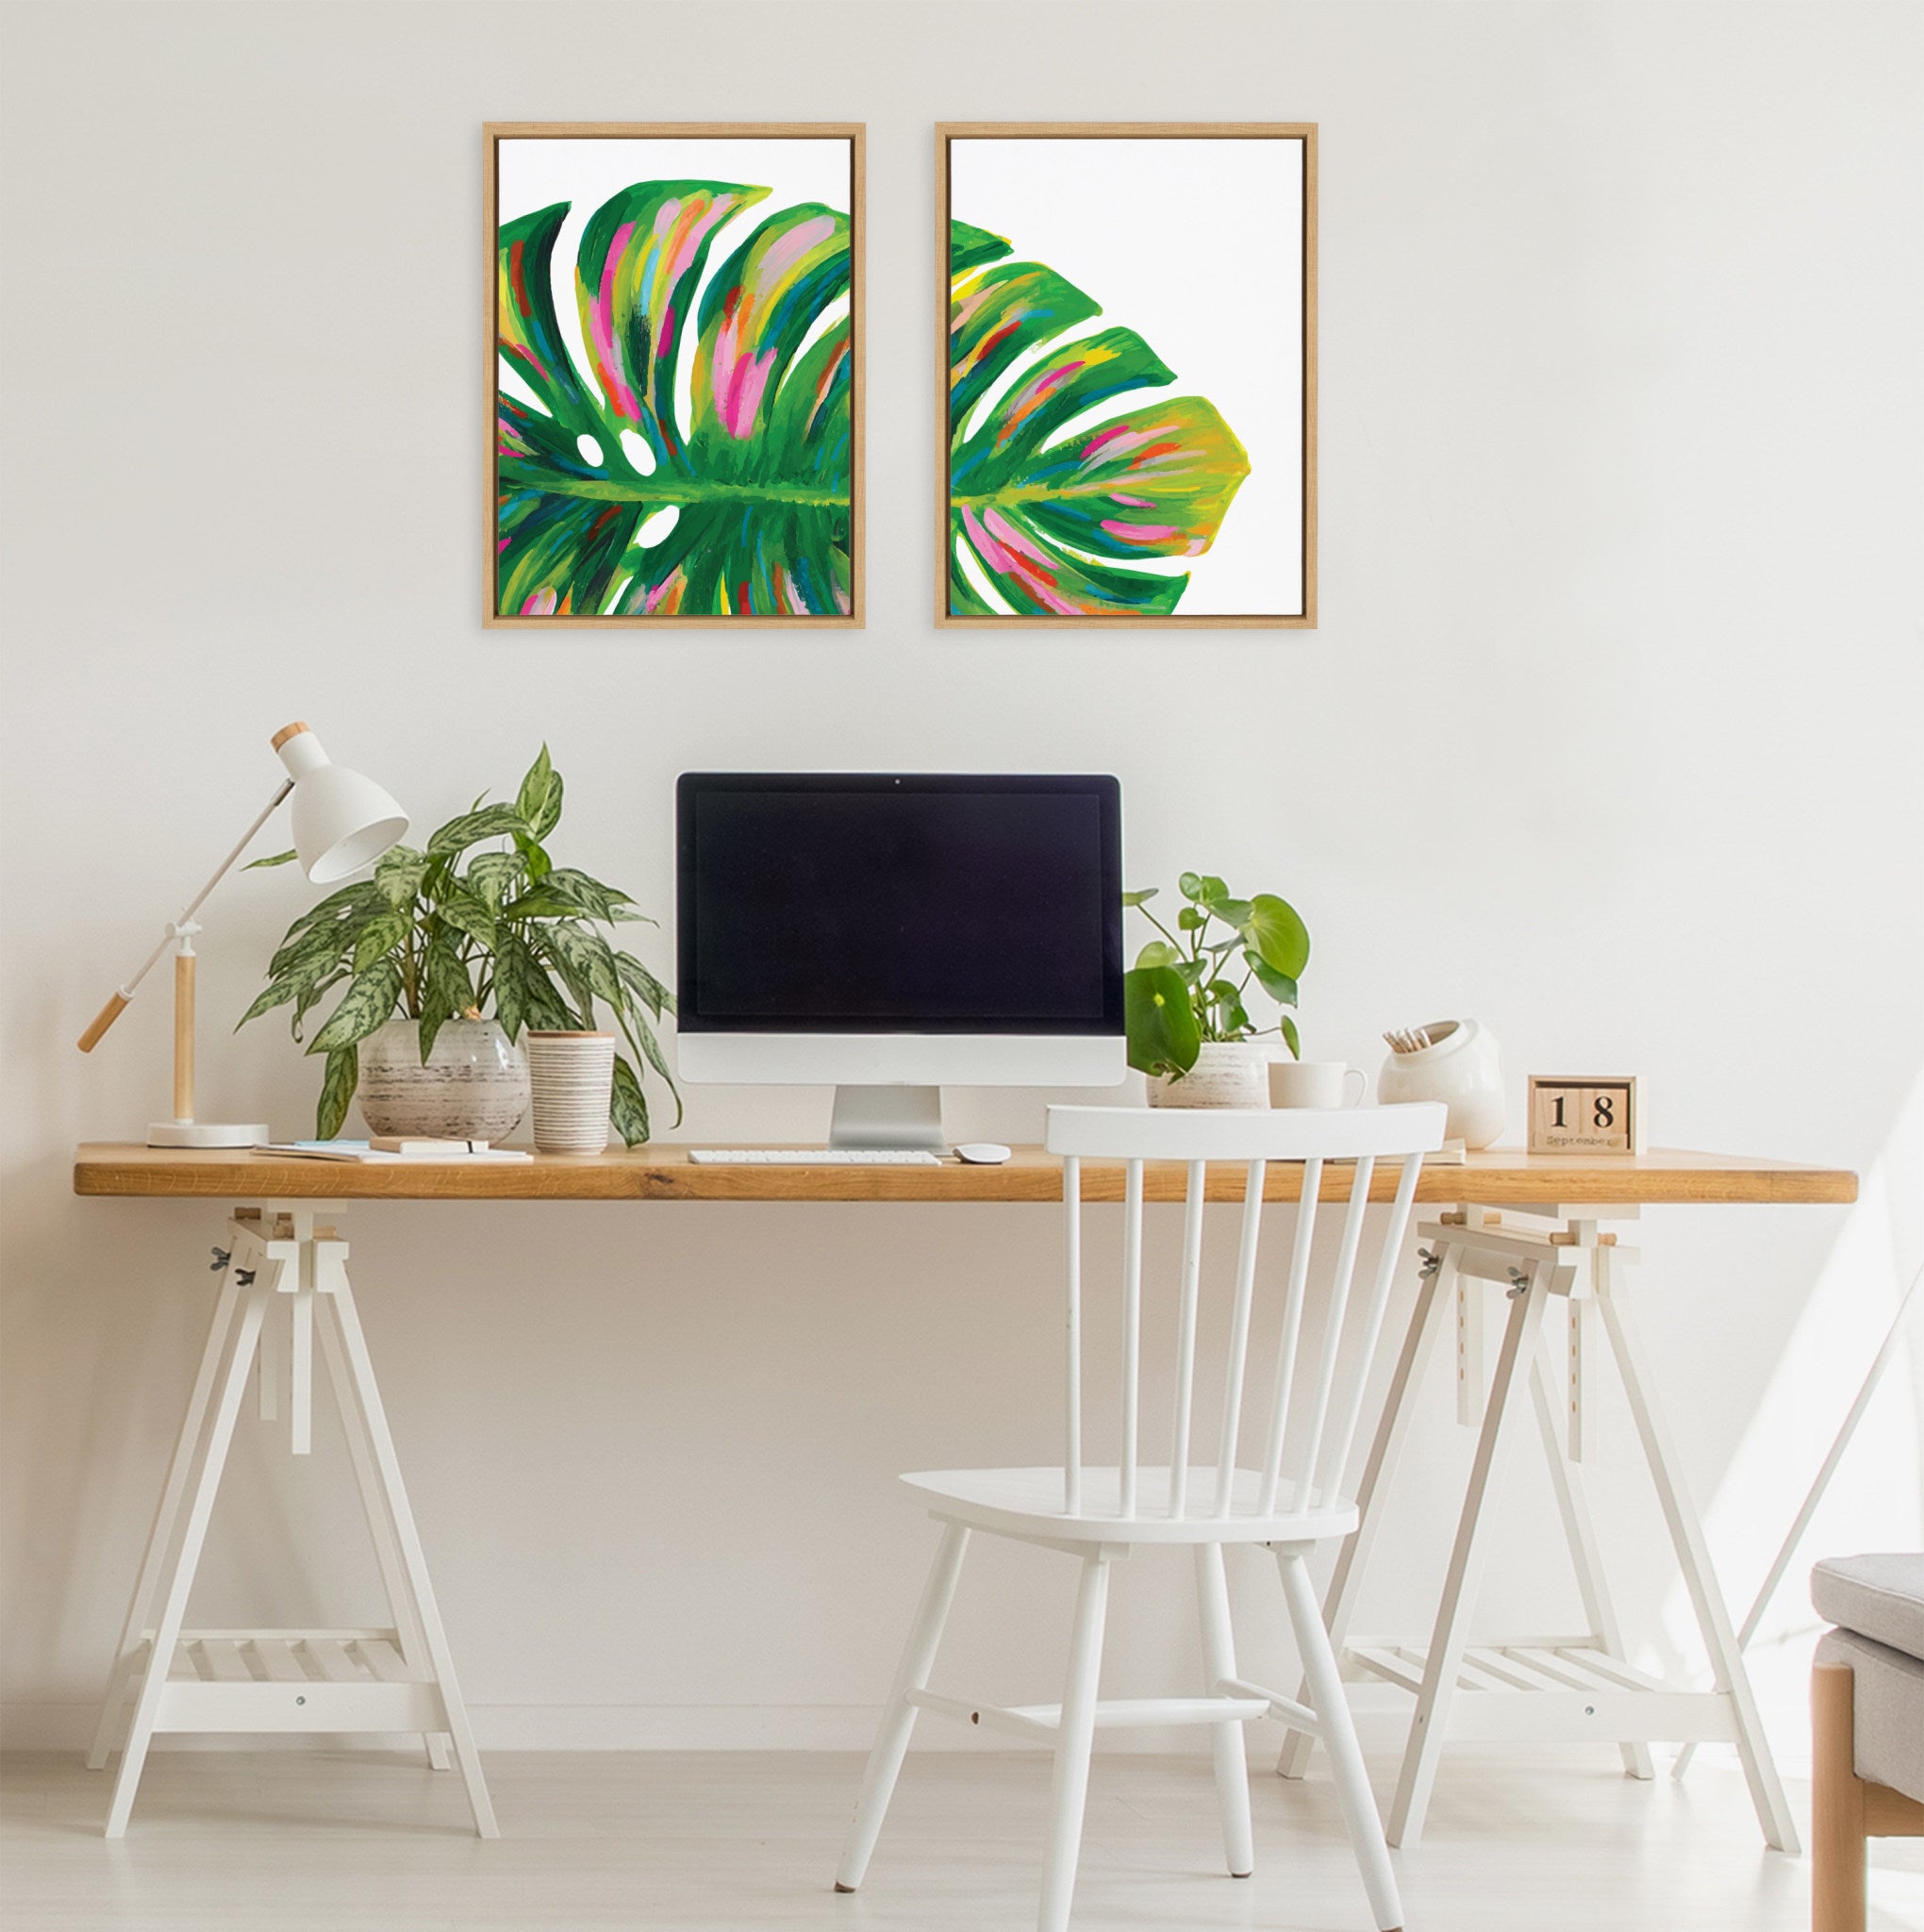 Sylvie Monstera 1 and 2 Framed Canvas Art Set by Jessi Raulet of Ettavee